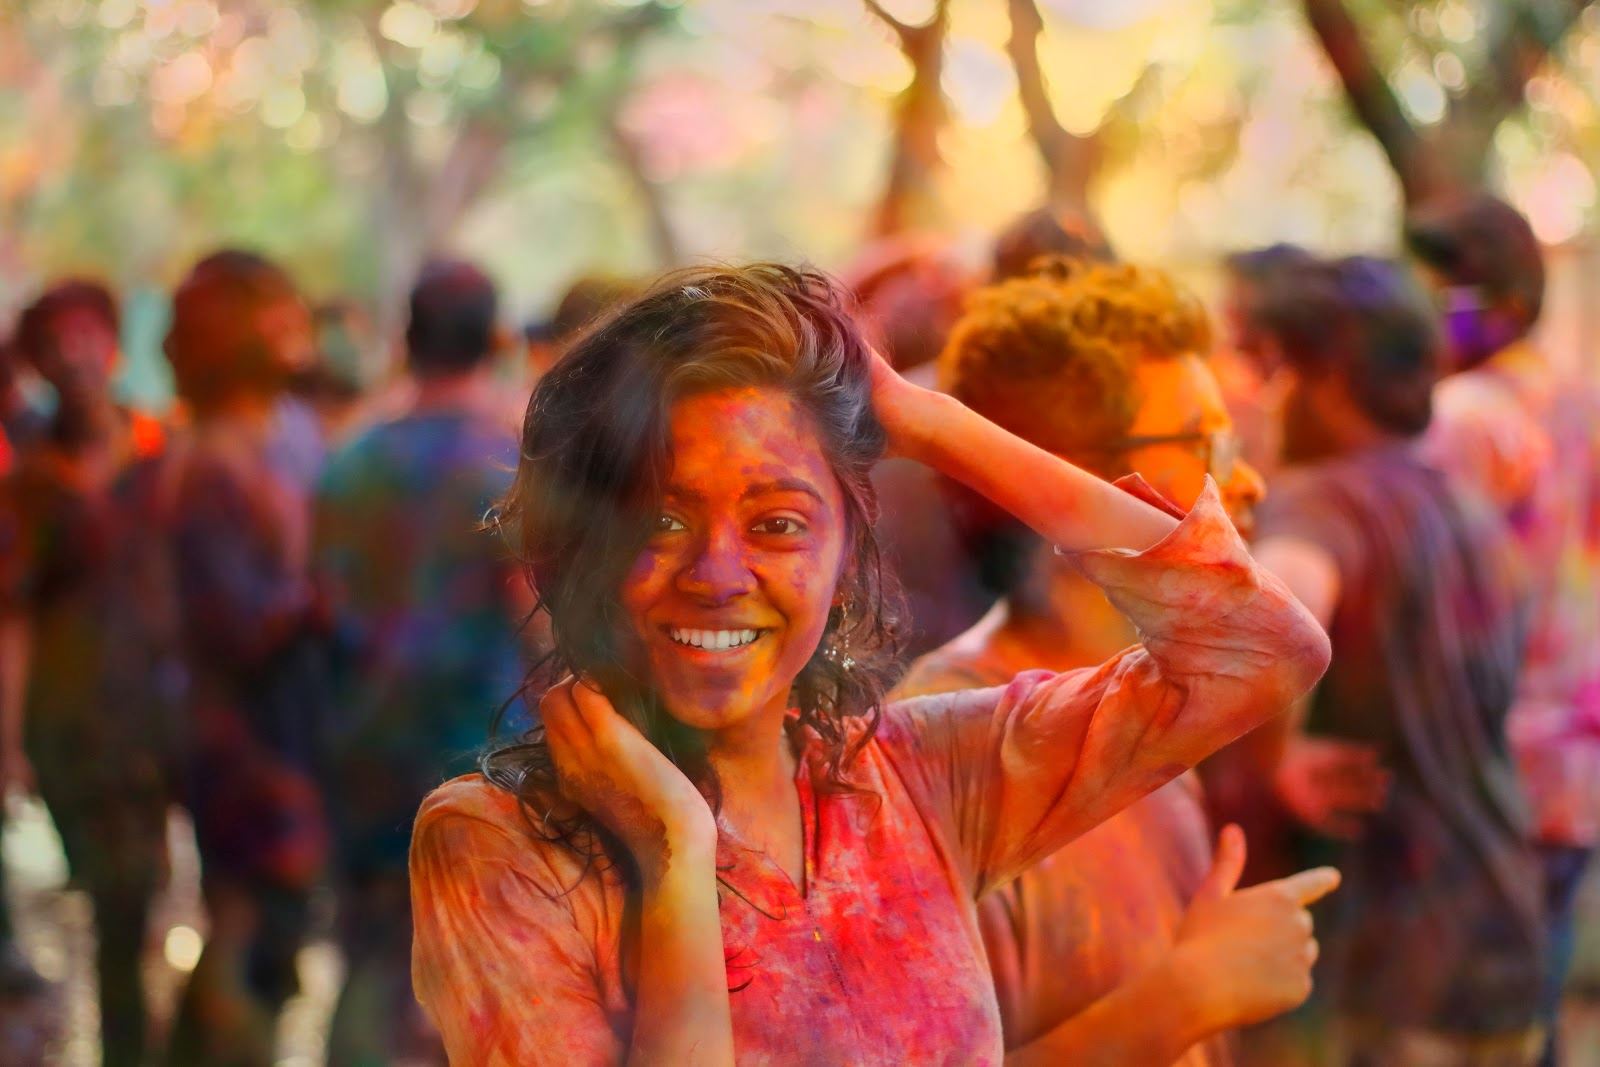 A young woman at a paint party, covered in red powder paint